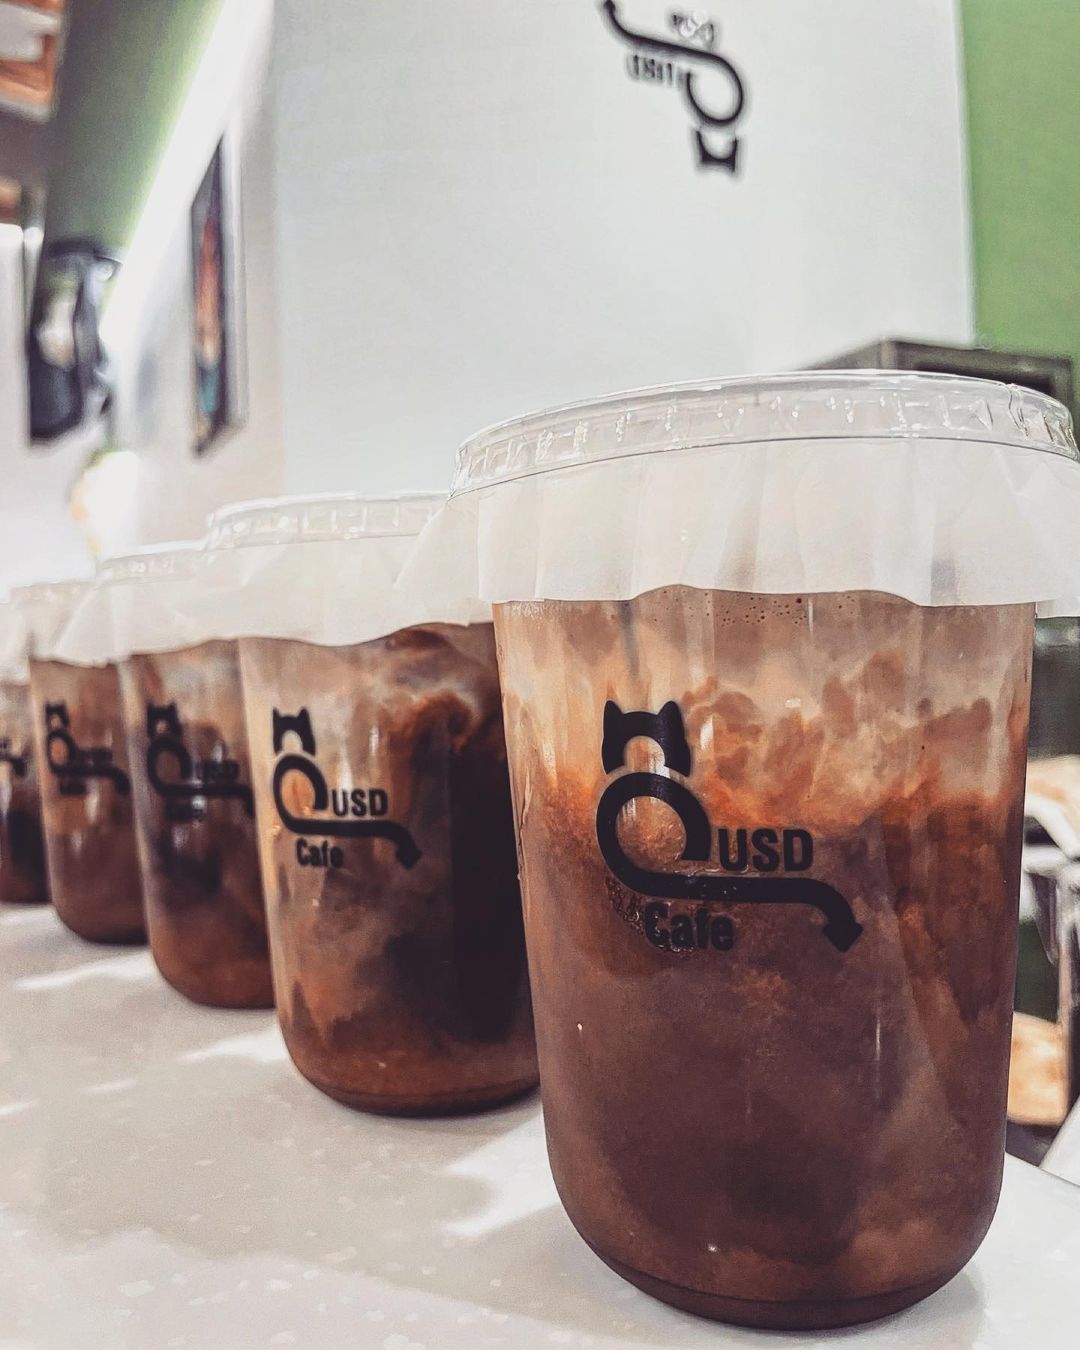 upside down cafe - iced coffees